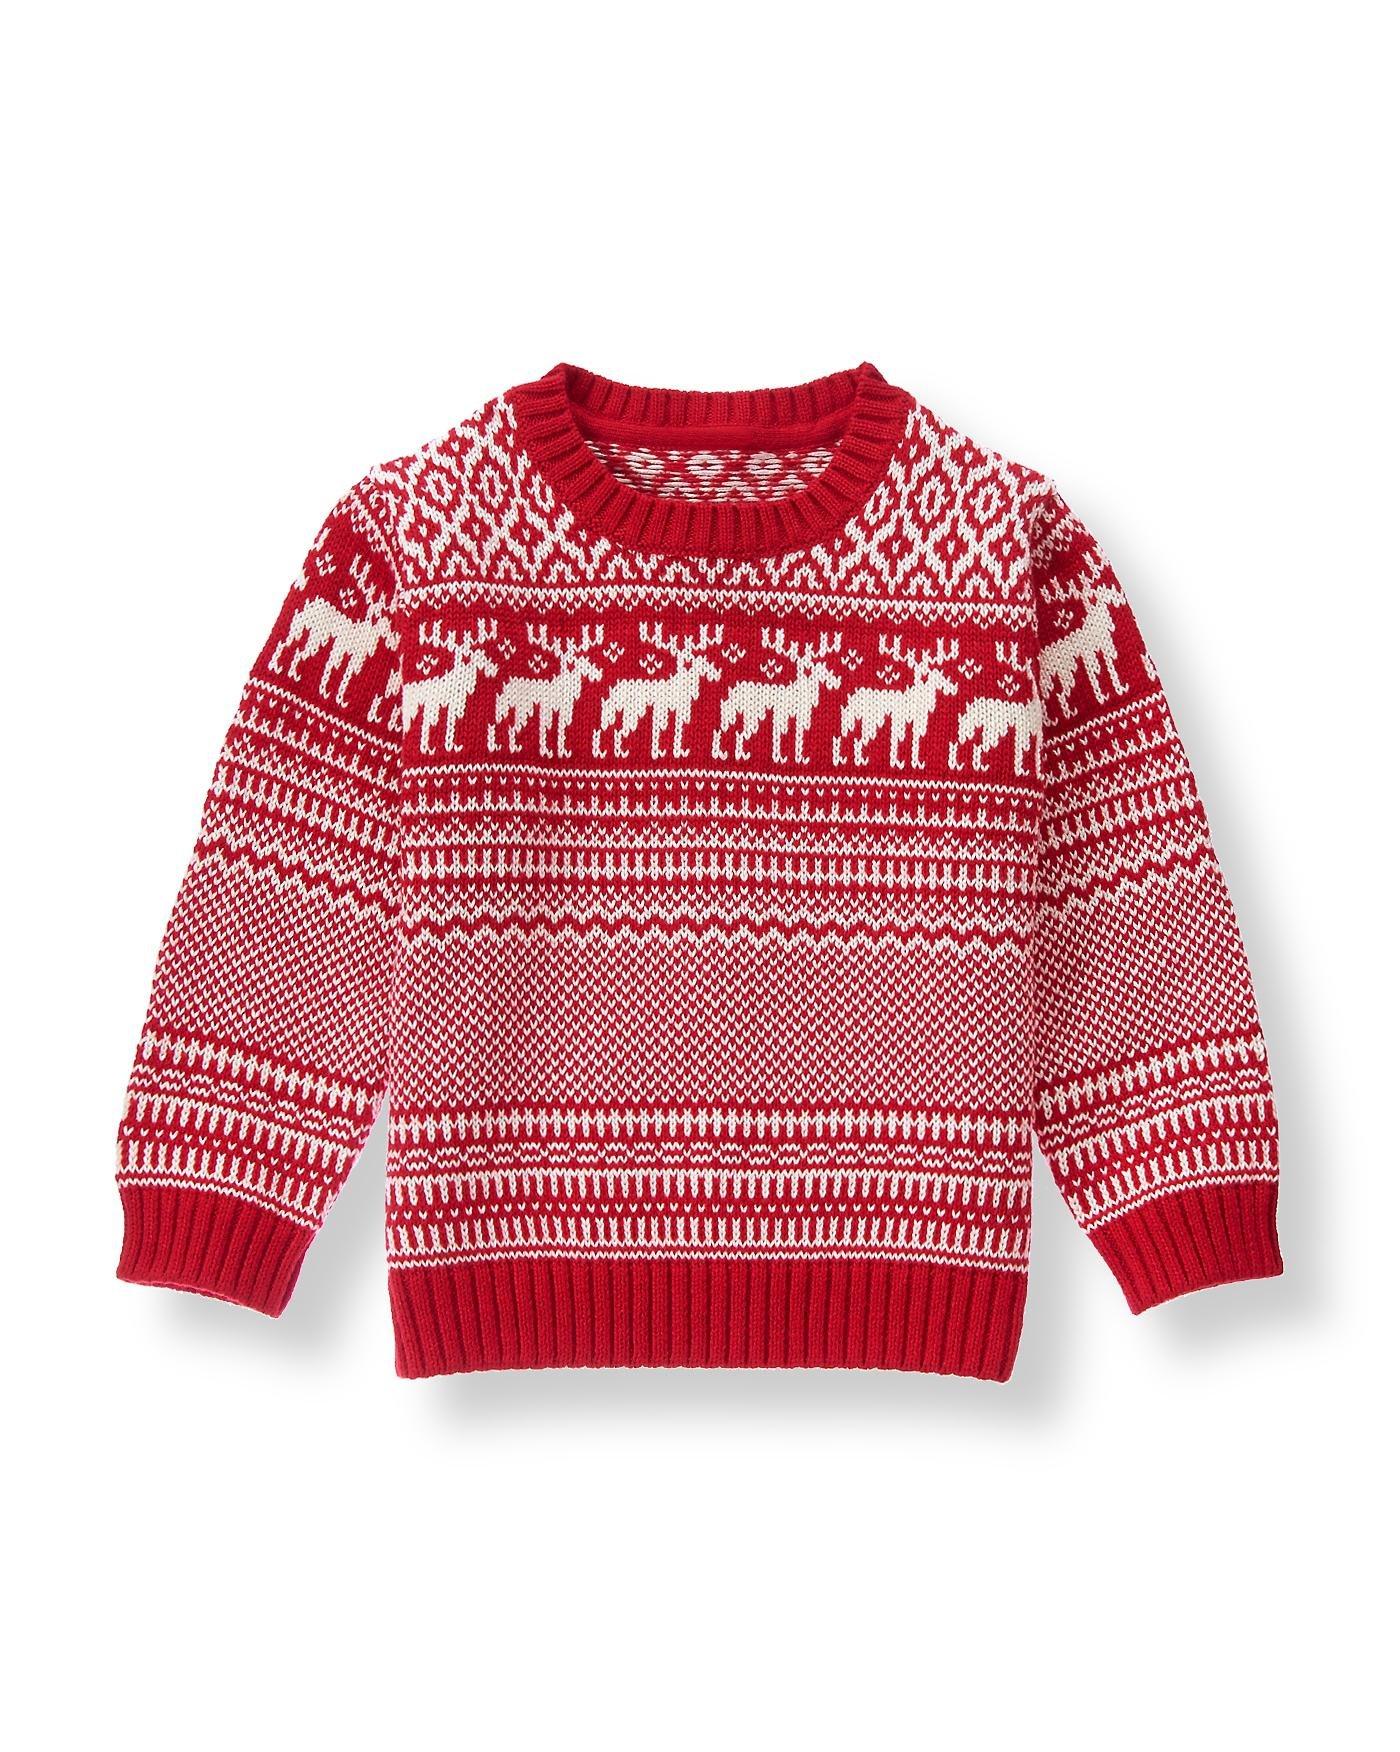 Details about   NWT Gymboree North Pole Party Gray Red Fair Isle Cardigan Sweater 6 12 18 24 2T